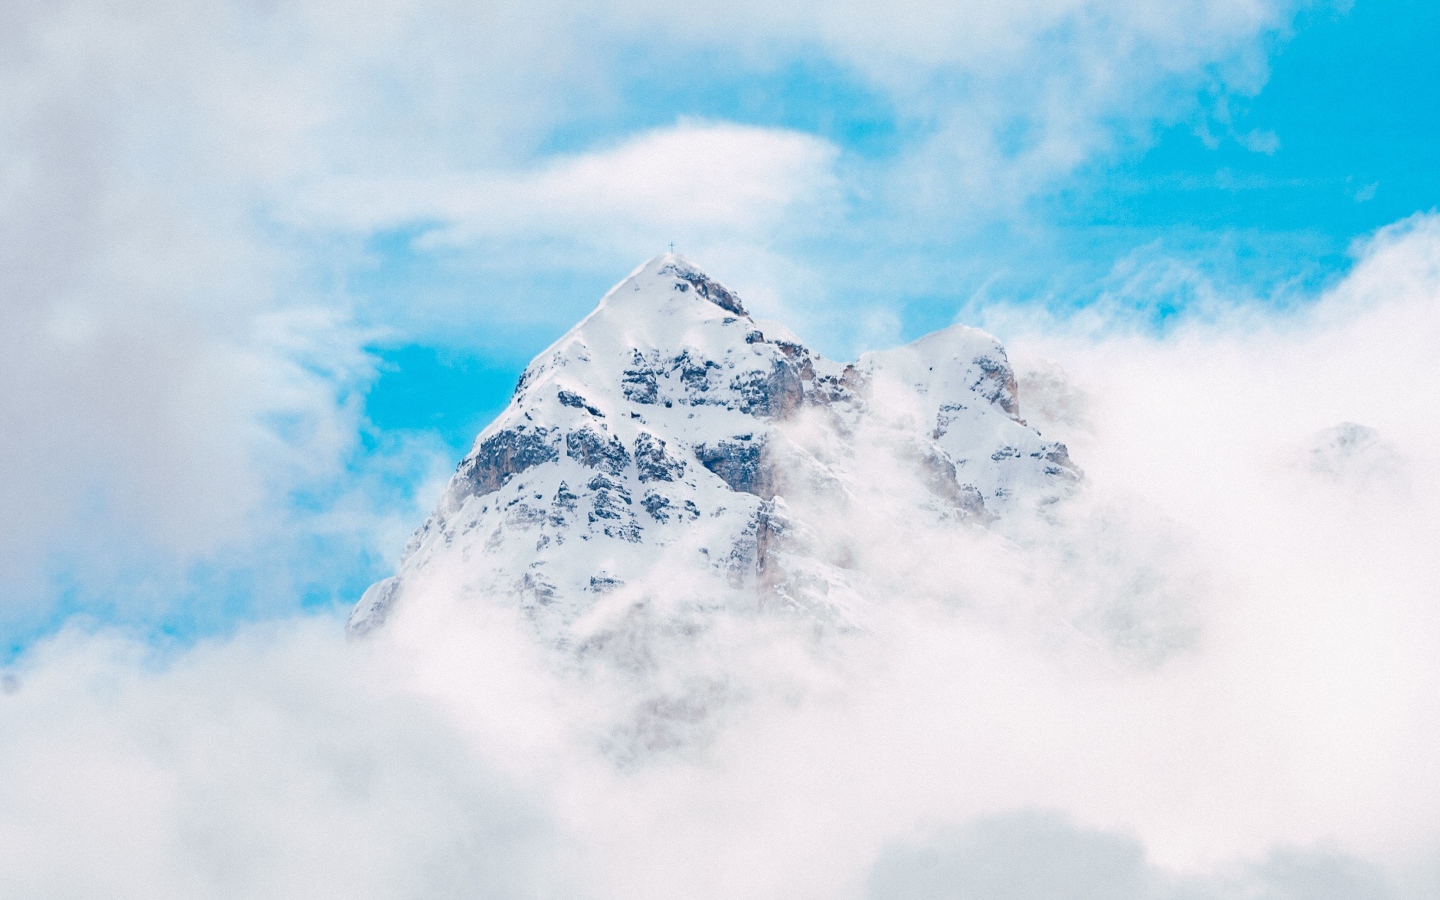 Snow-capped mountain peak in white clouds under blue sky